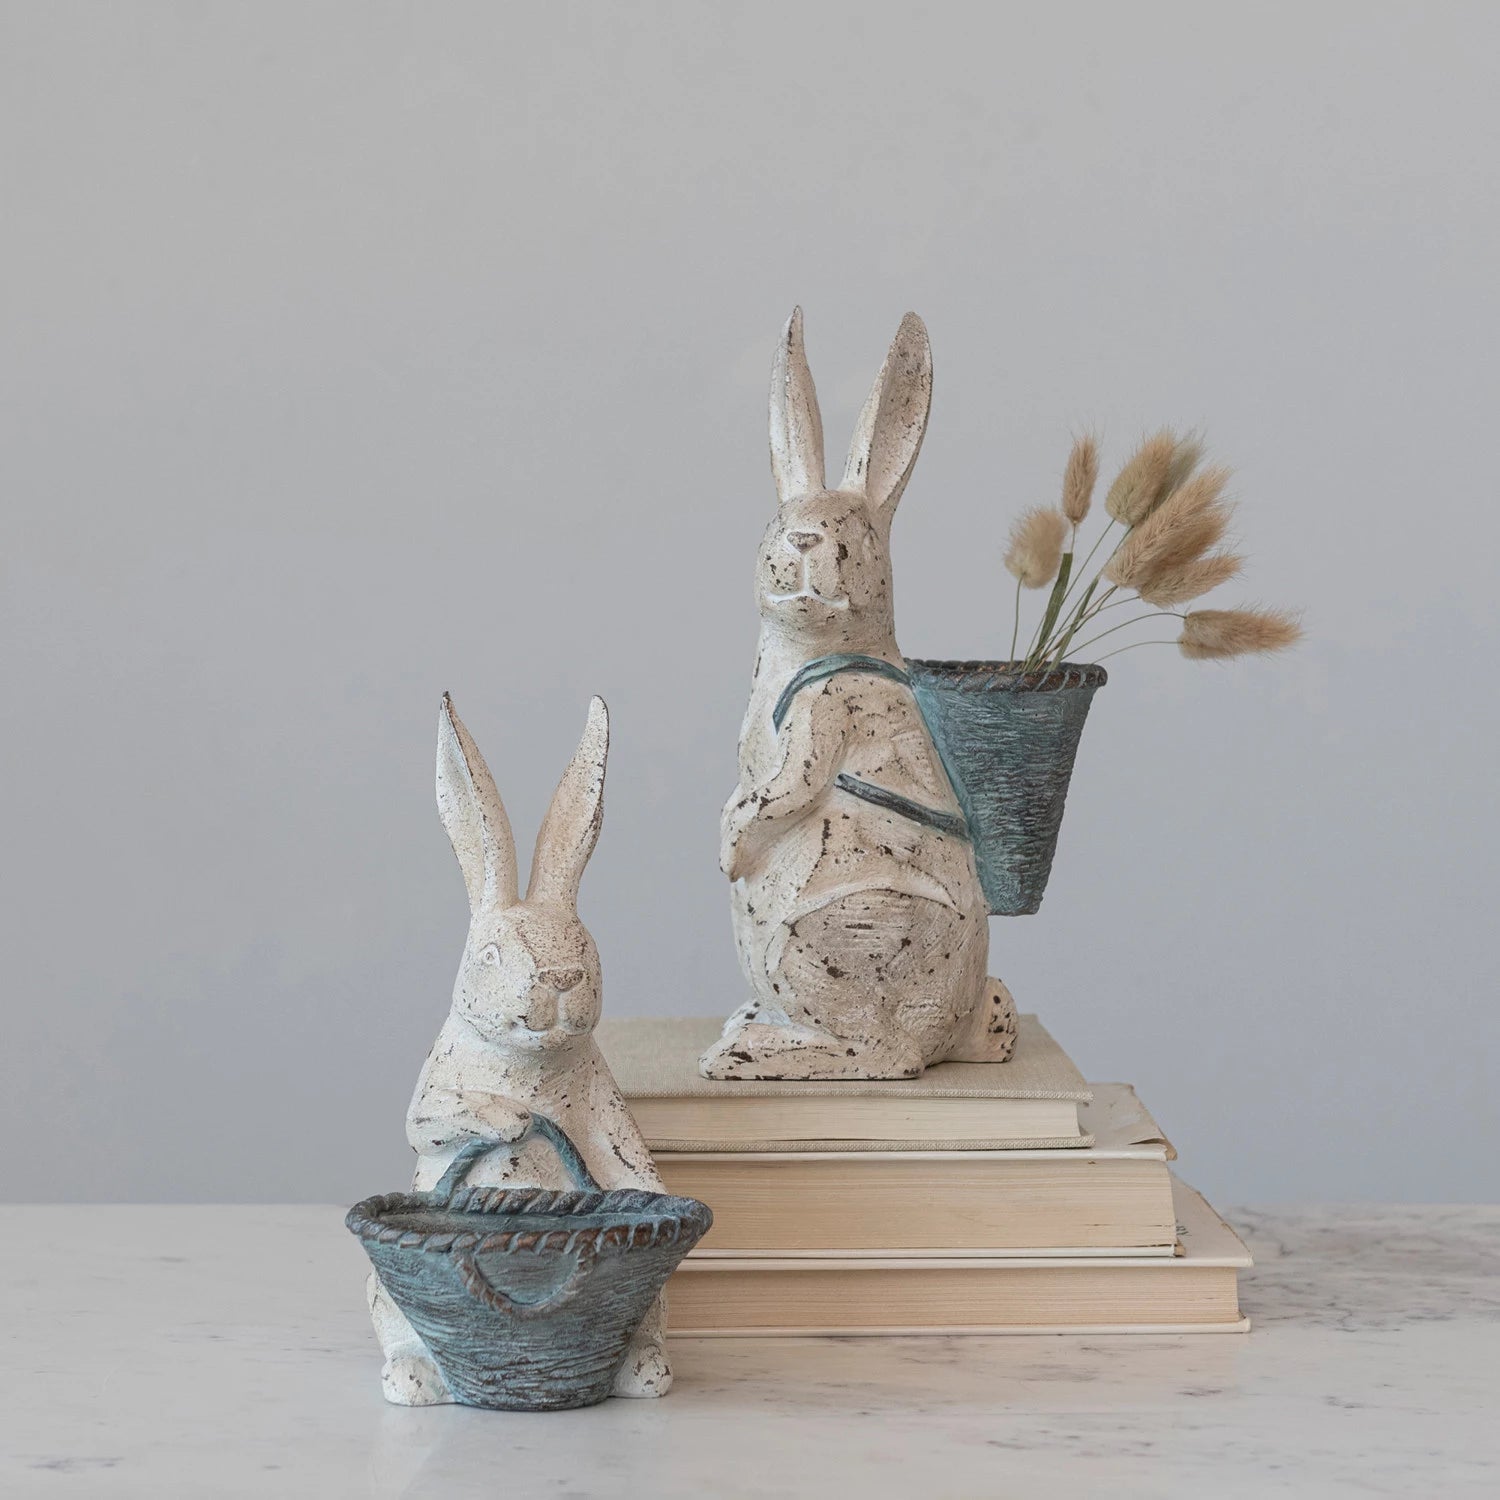 Bunnies with Baskets Figurines